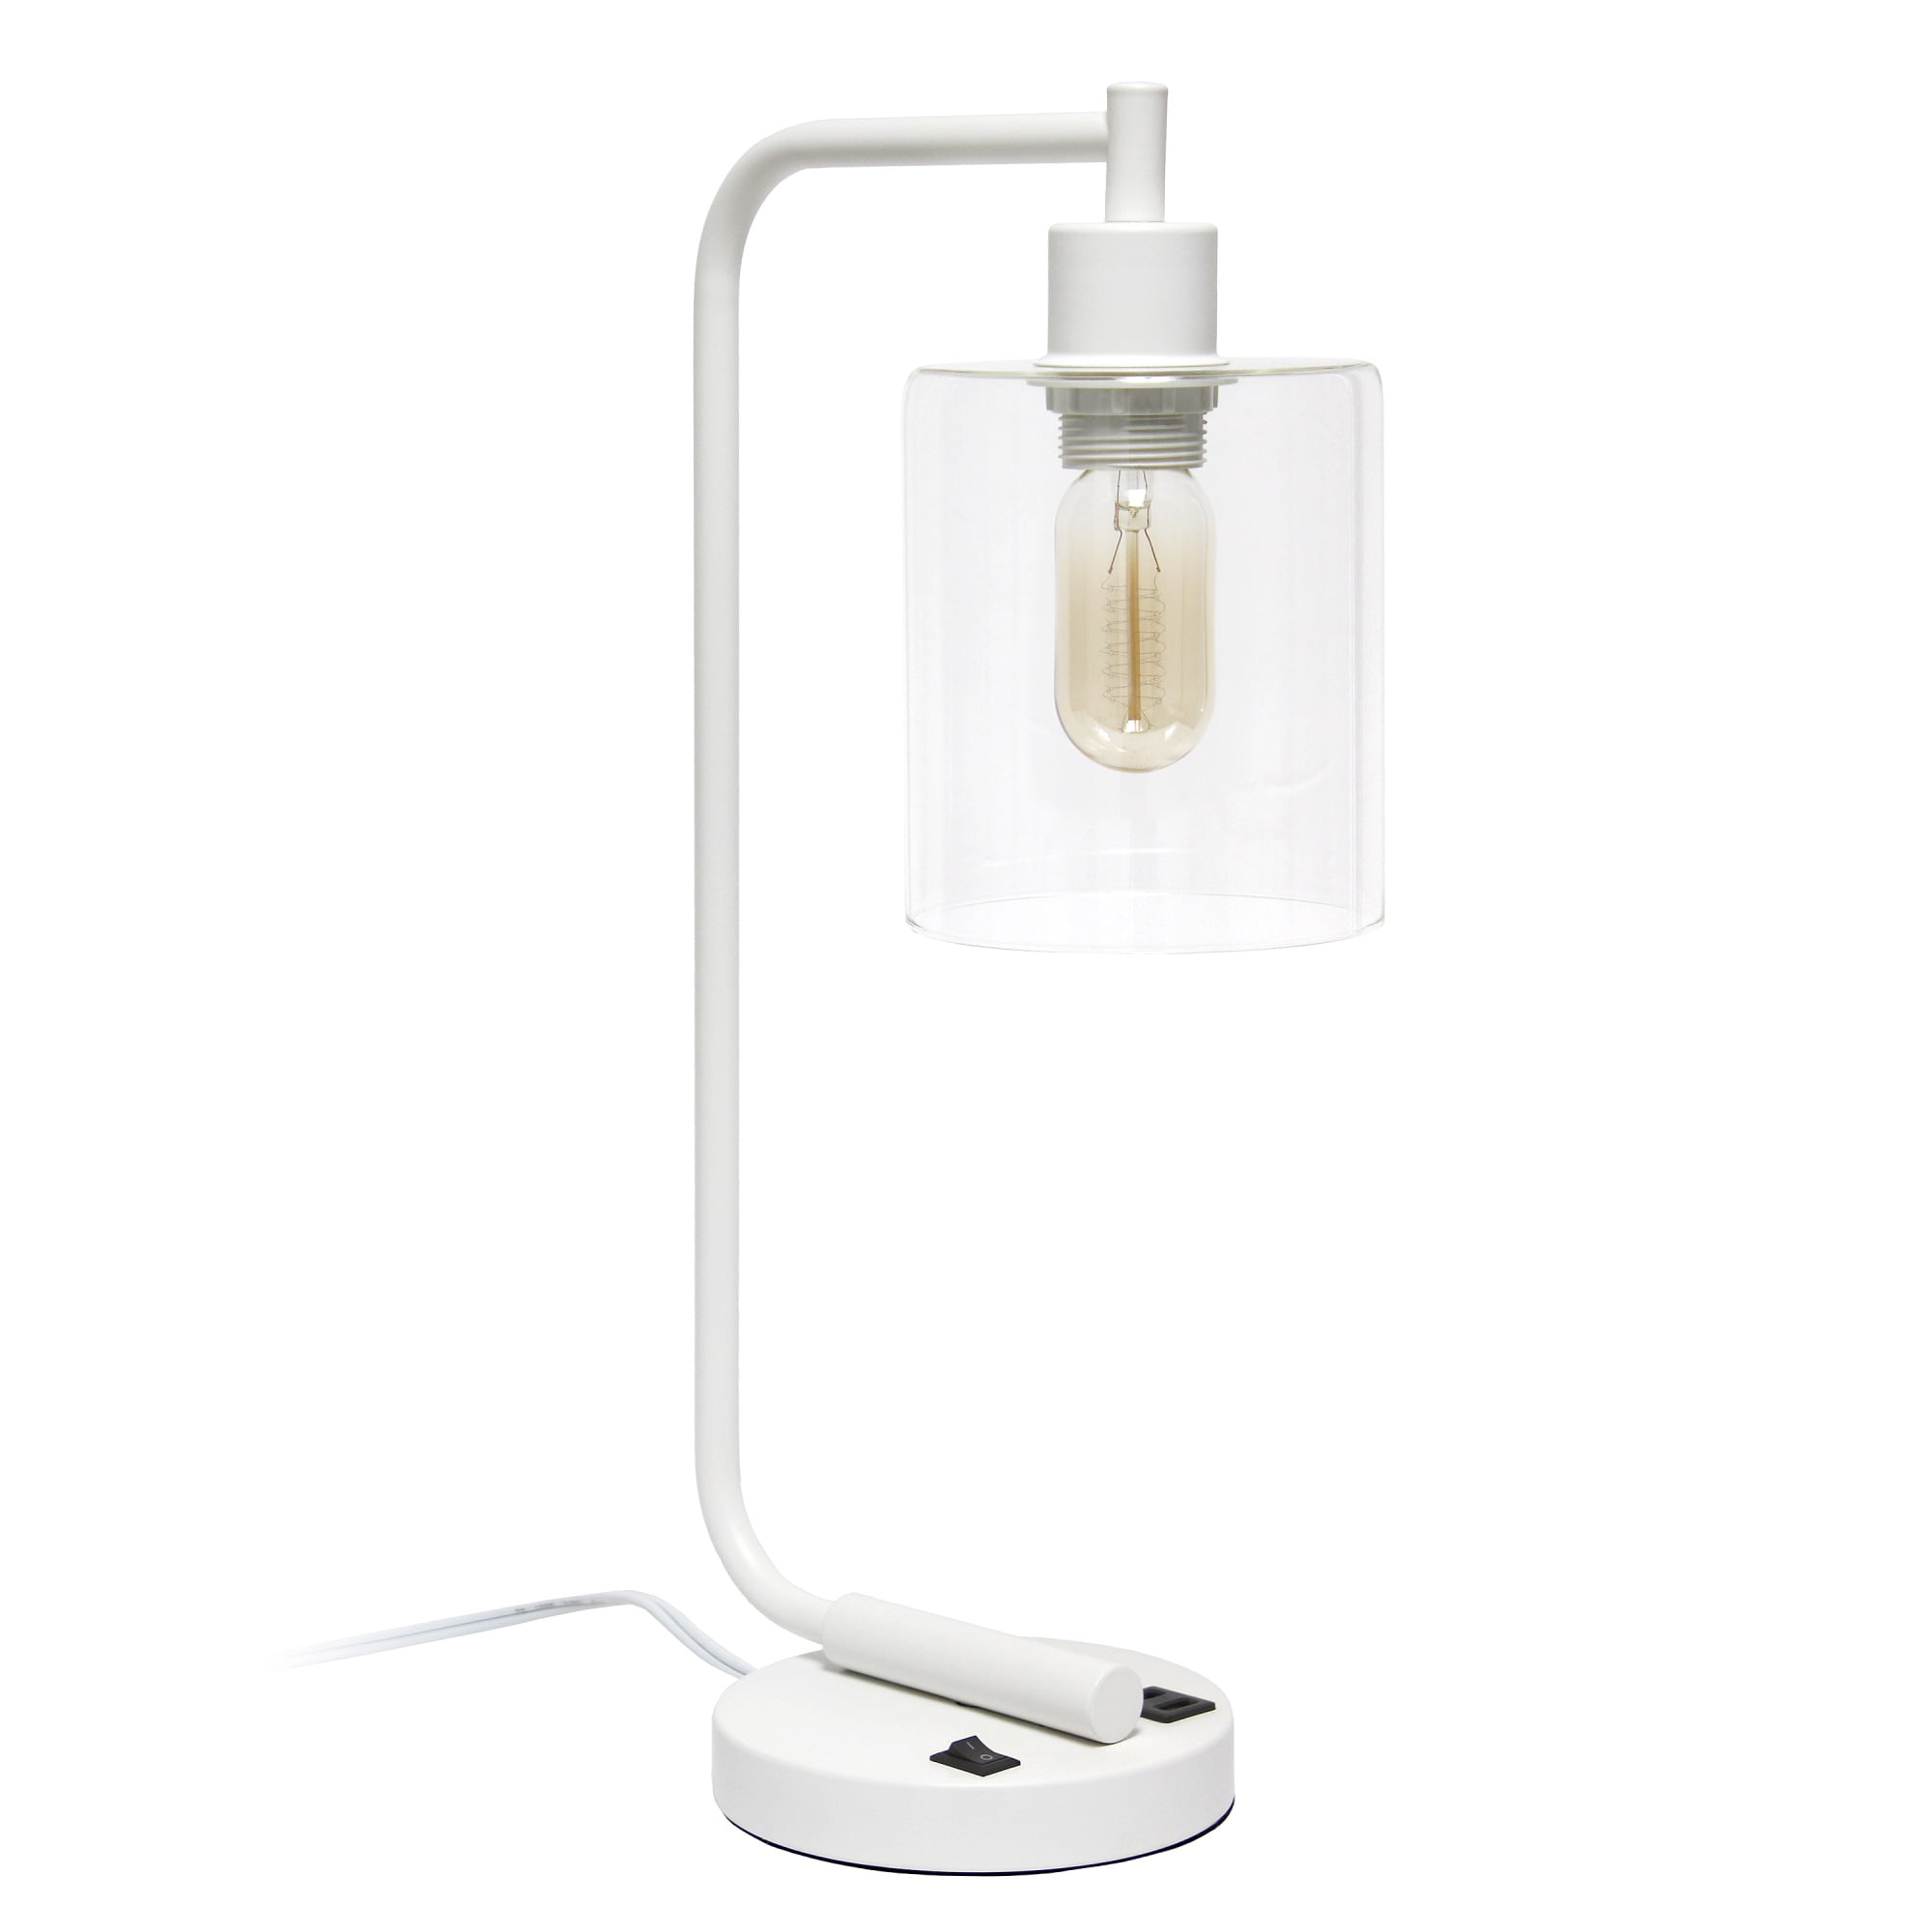 Lalia Home Modern Iron Desk Lamp with USB Port and Glass Shade, White